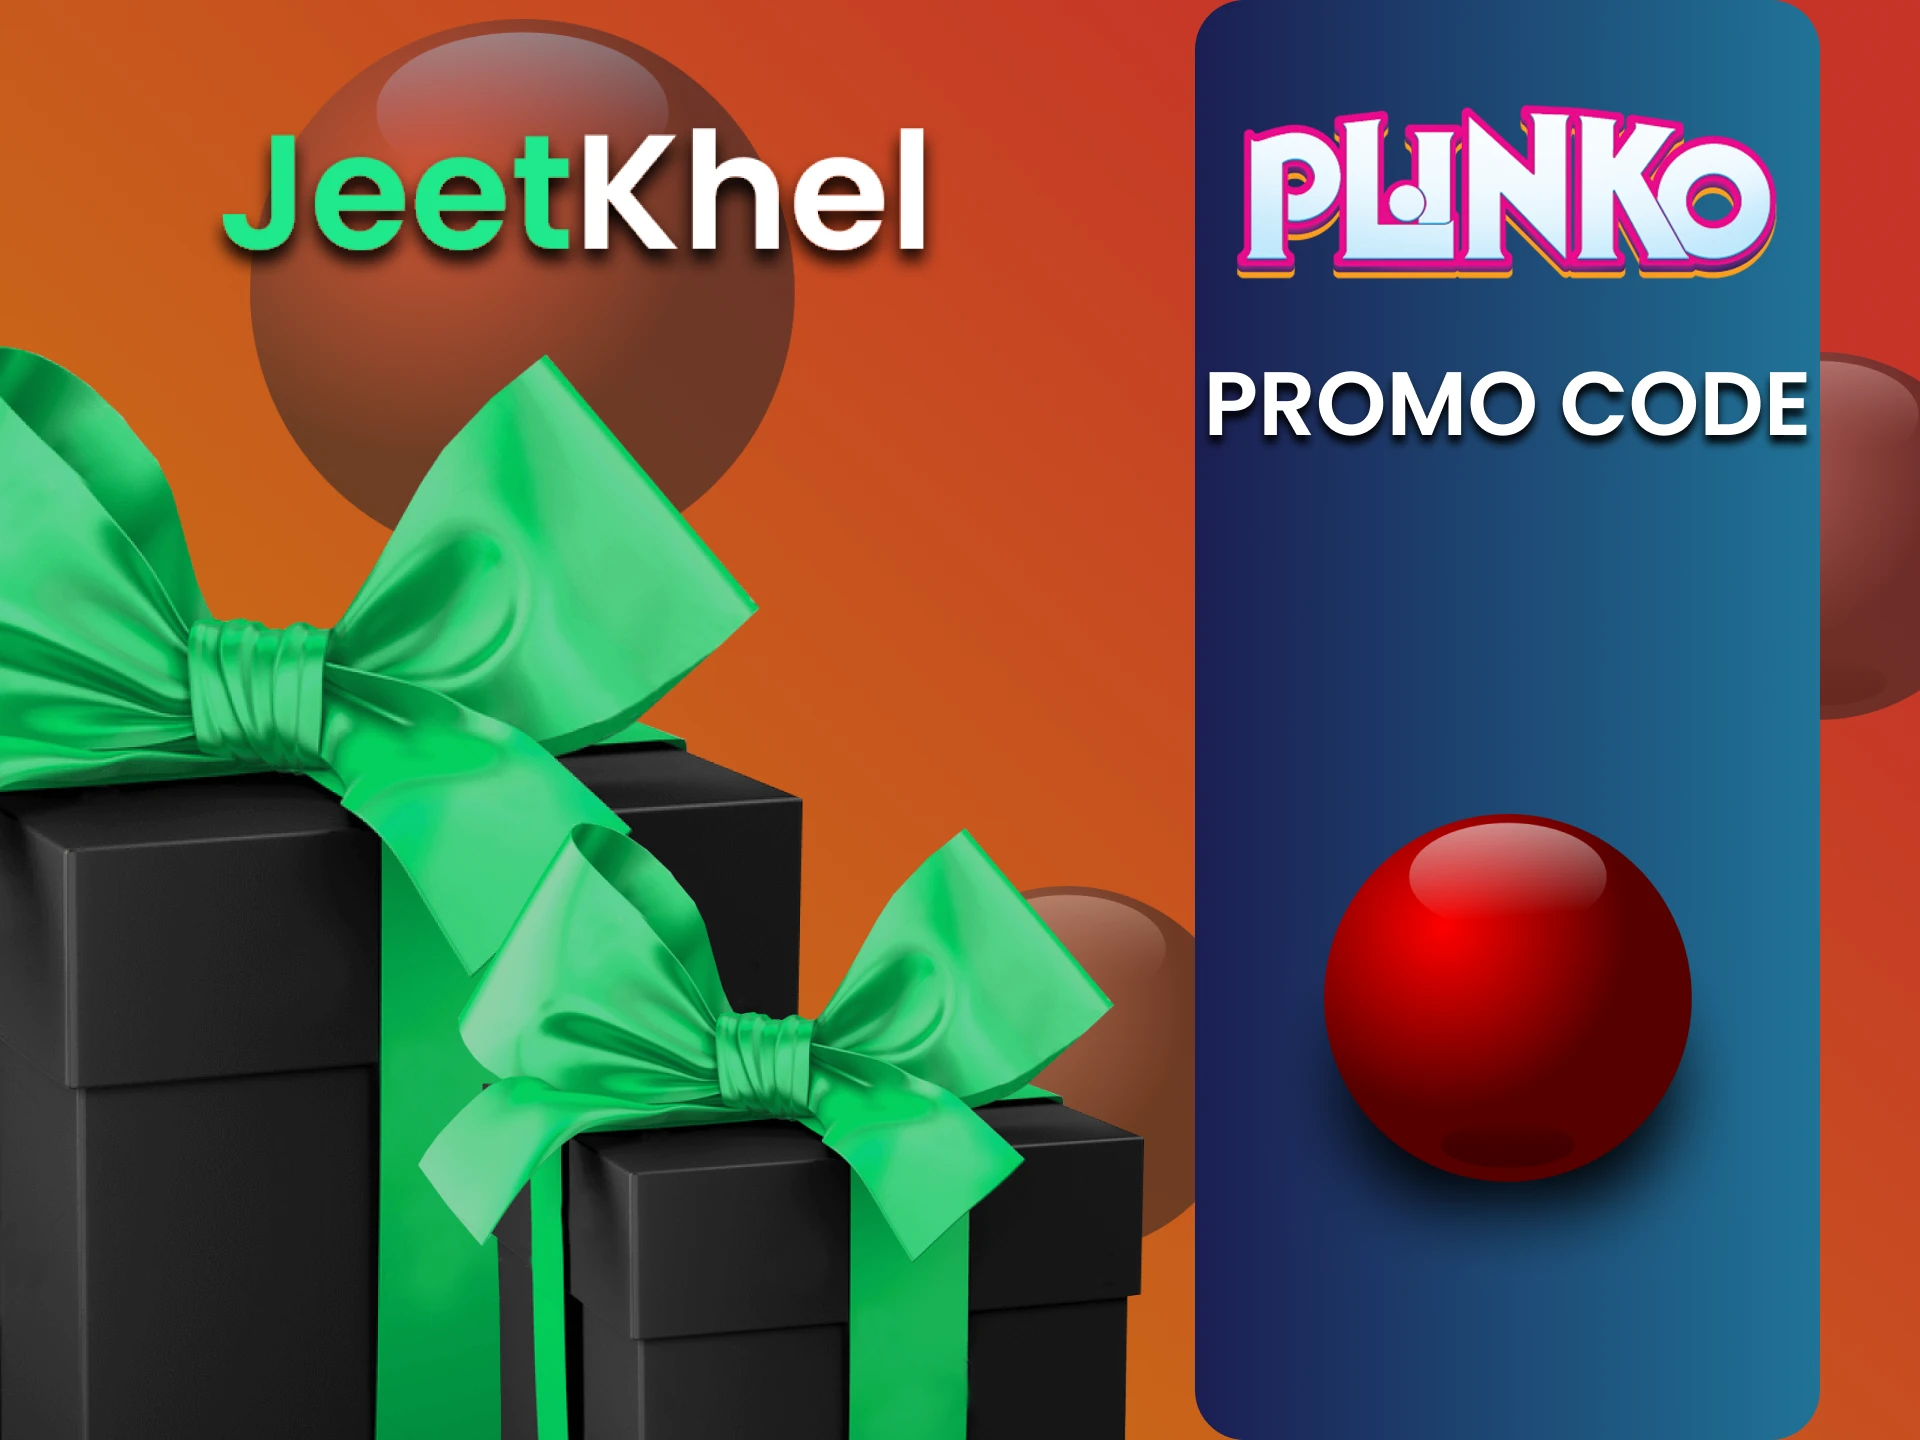 Enter the promo code and get a bonus for the Plinko game from JeetKhel.